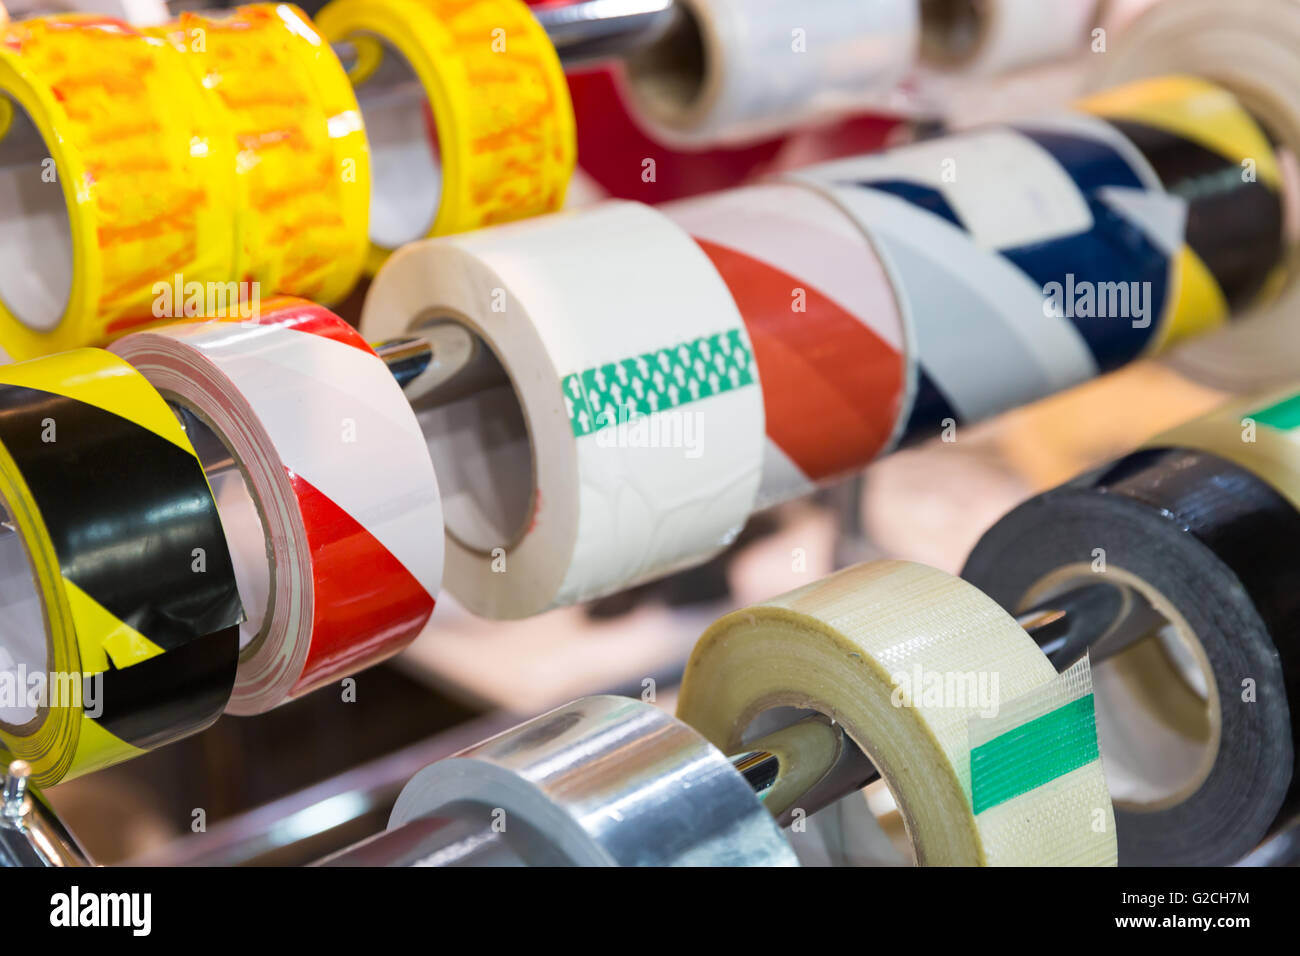 Rolls of packing scotch tapes Stock Photo